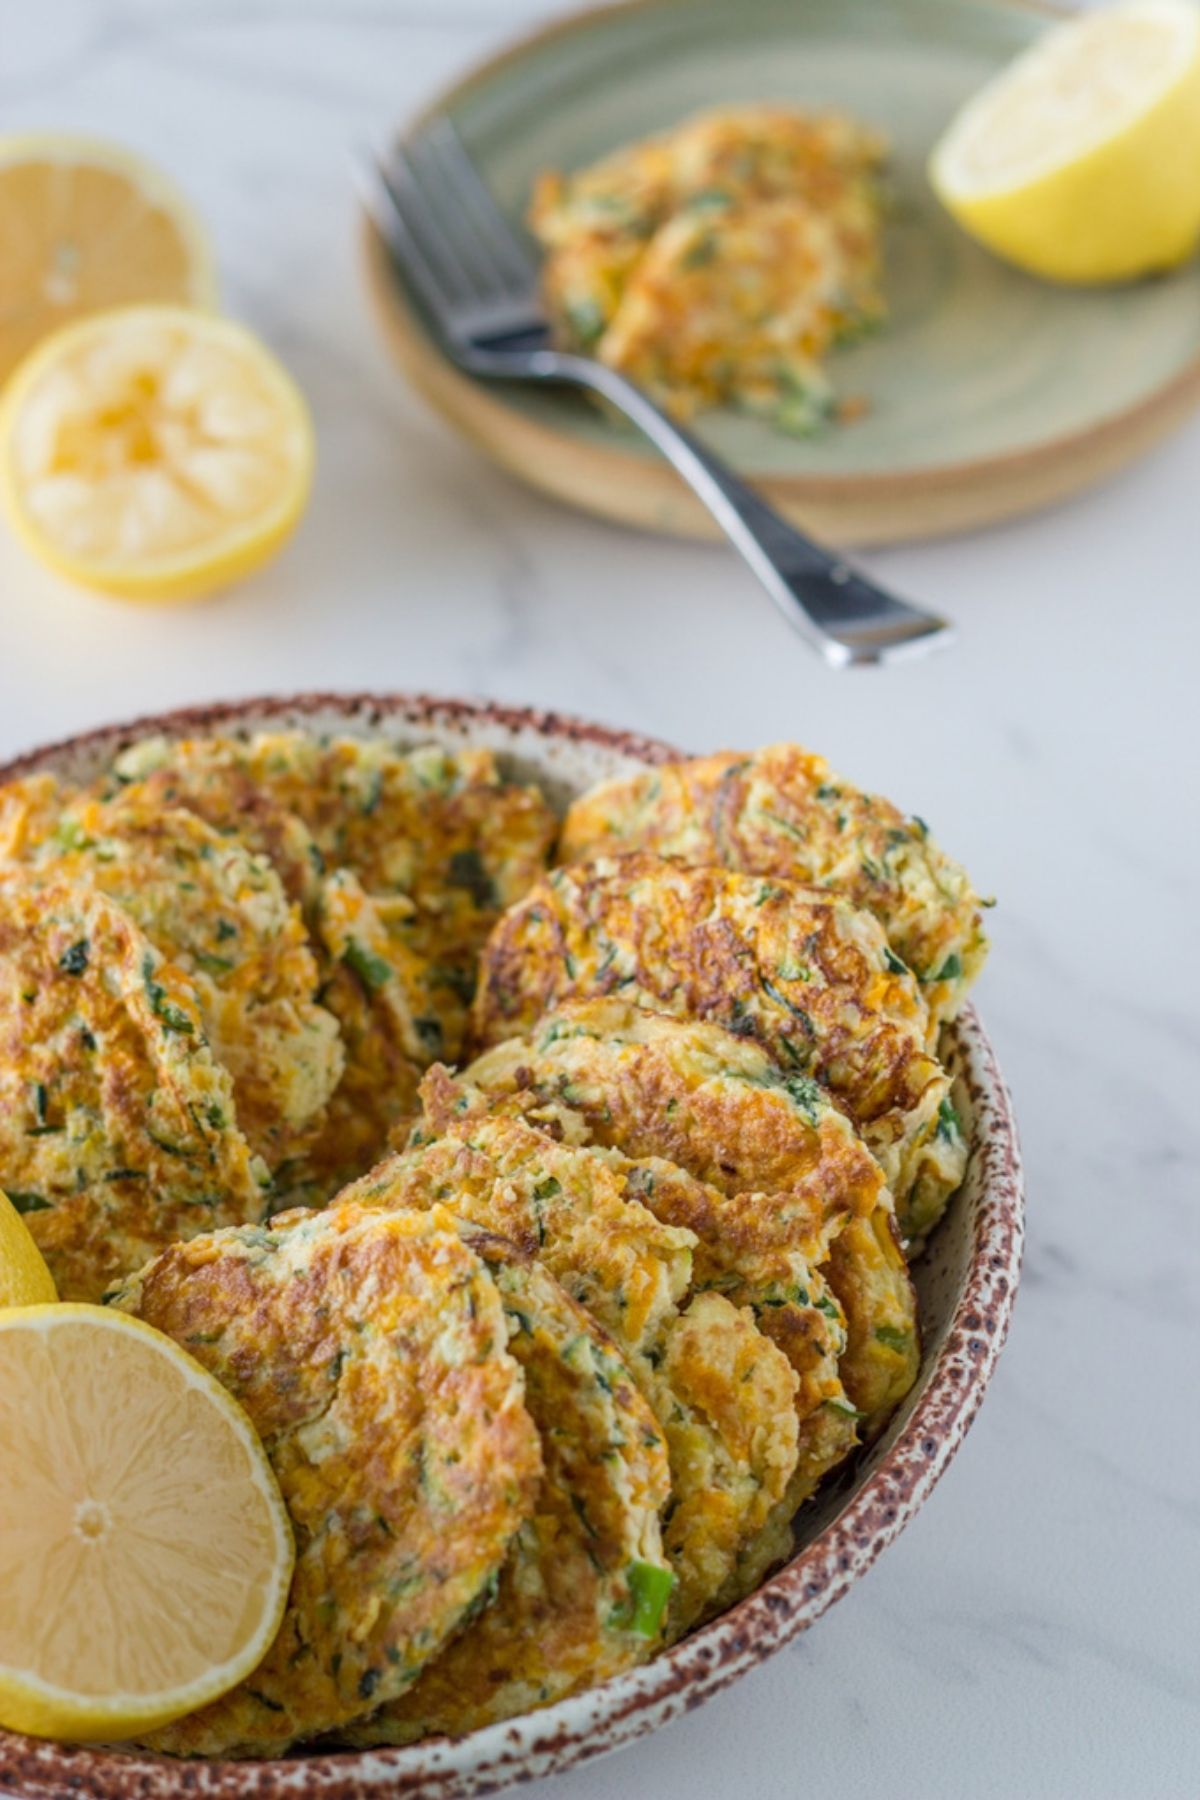 Bowl of pumpkin and zucchini fritters with some lemon and a place behind it with a fritter on it.